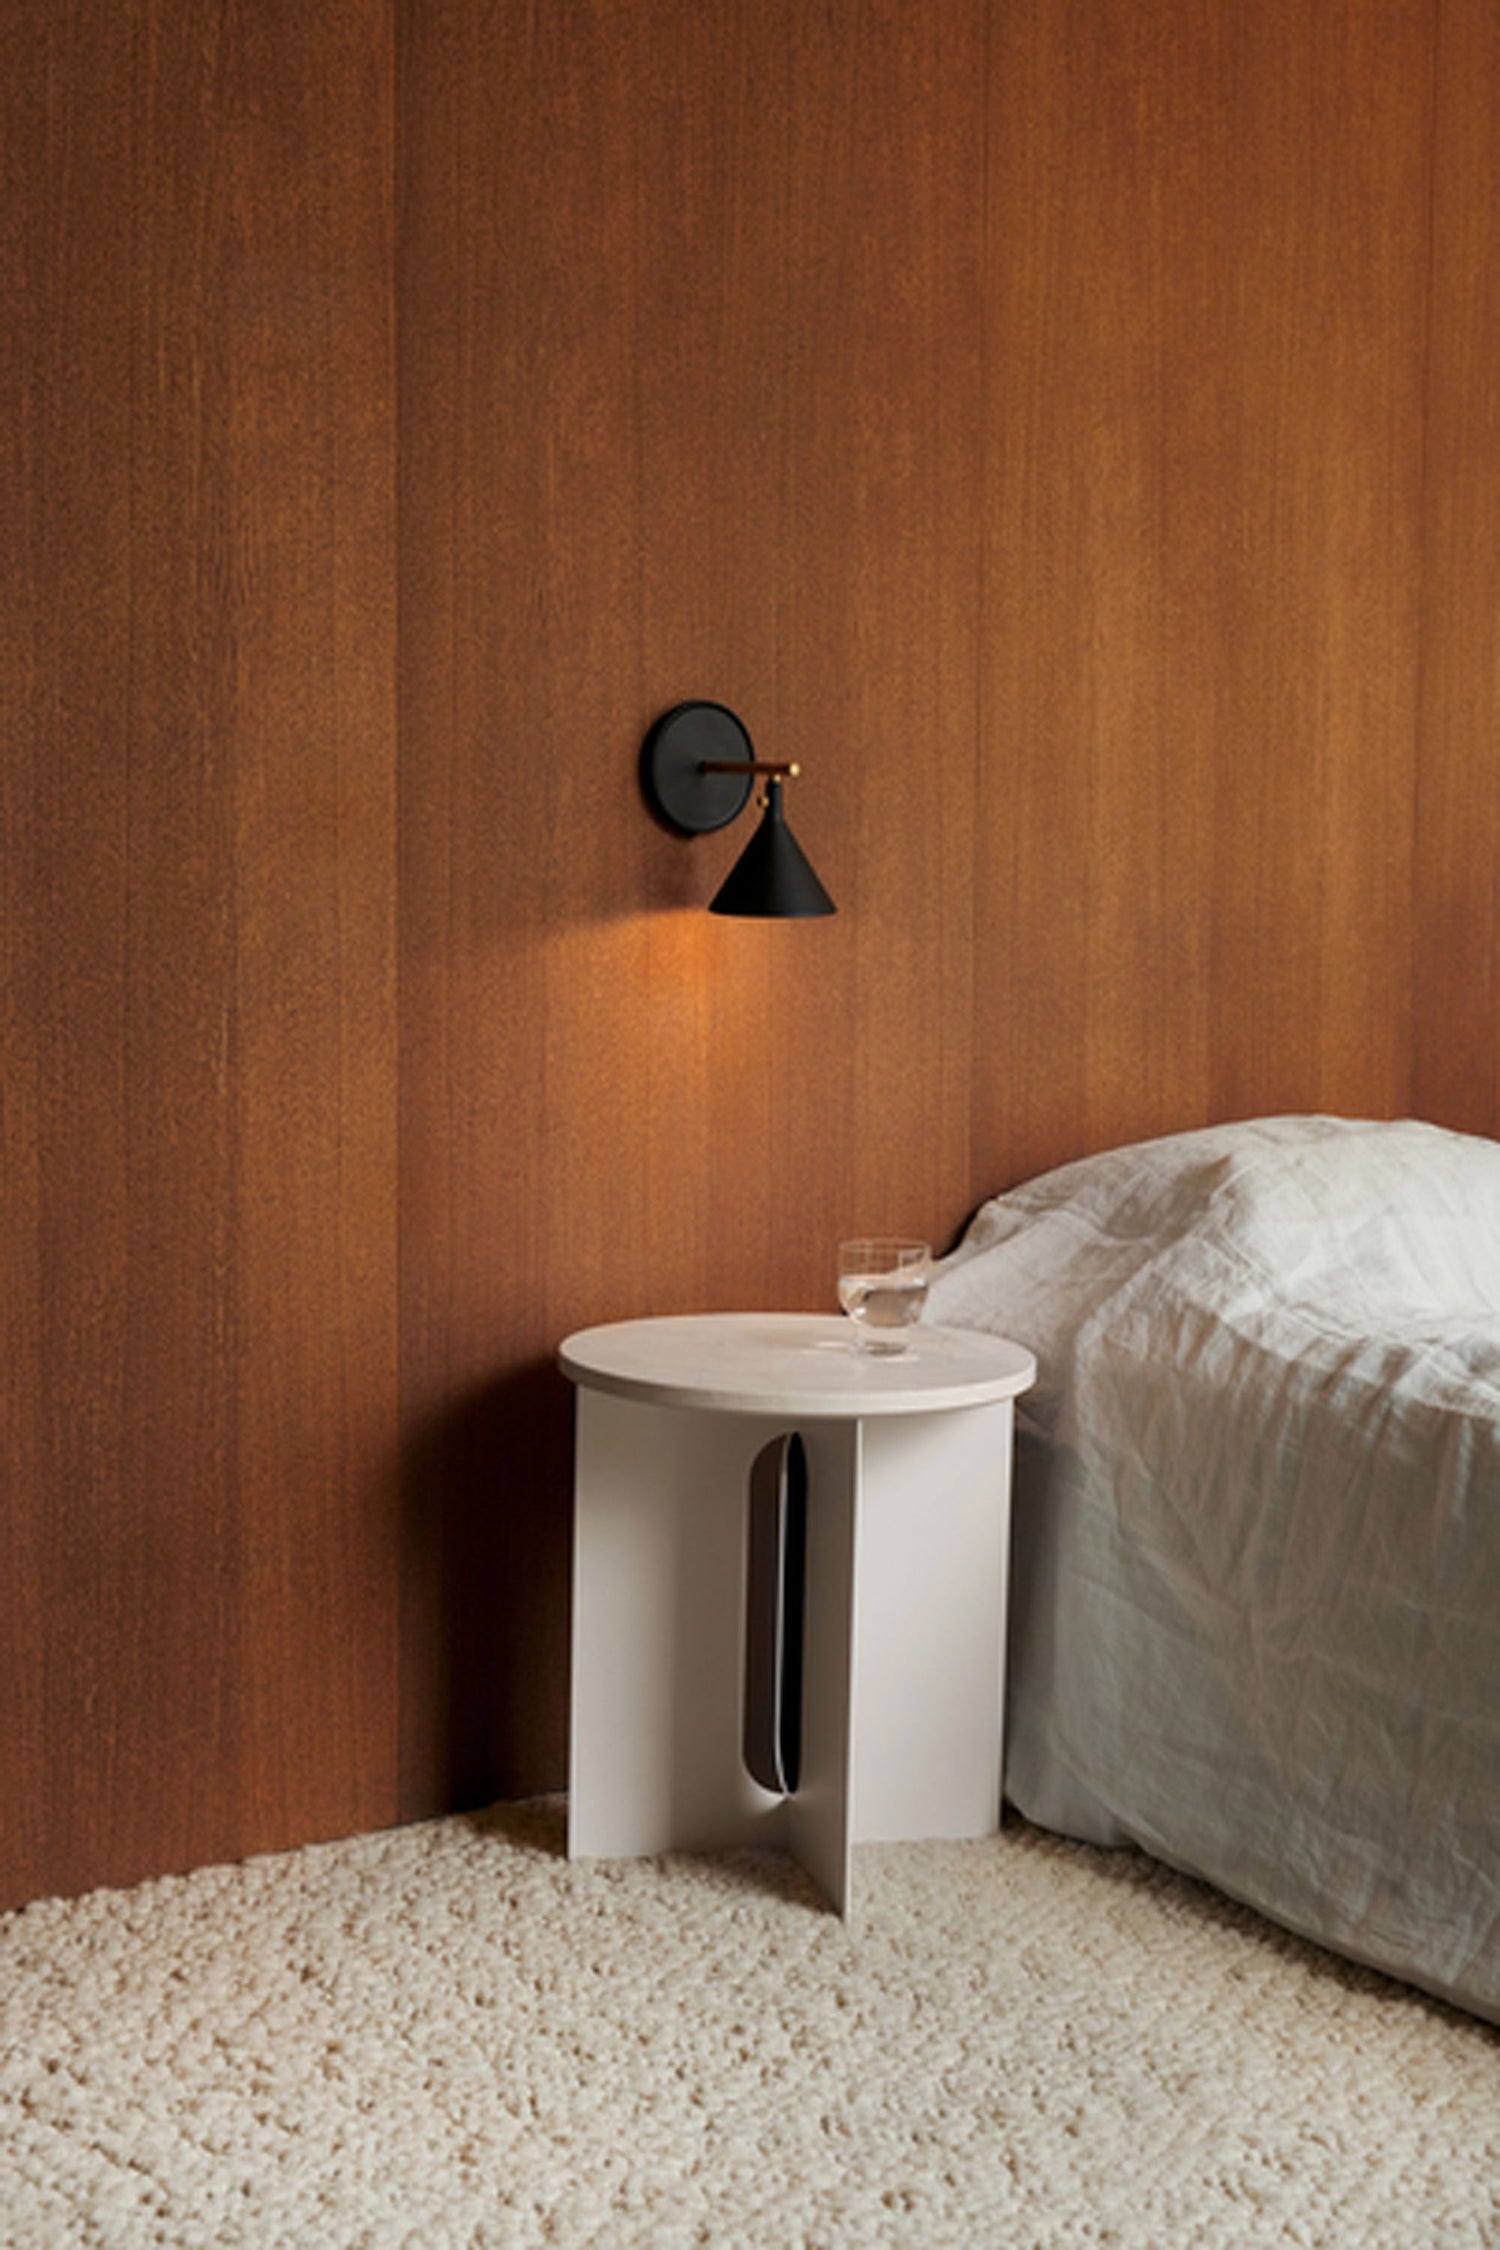 Cast Sconce Wall Lamp Diffuser, dimmer Black by Menu in a bedroom interior setting.